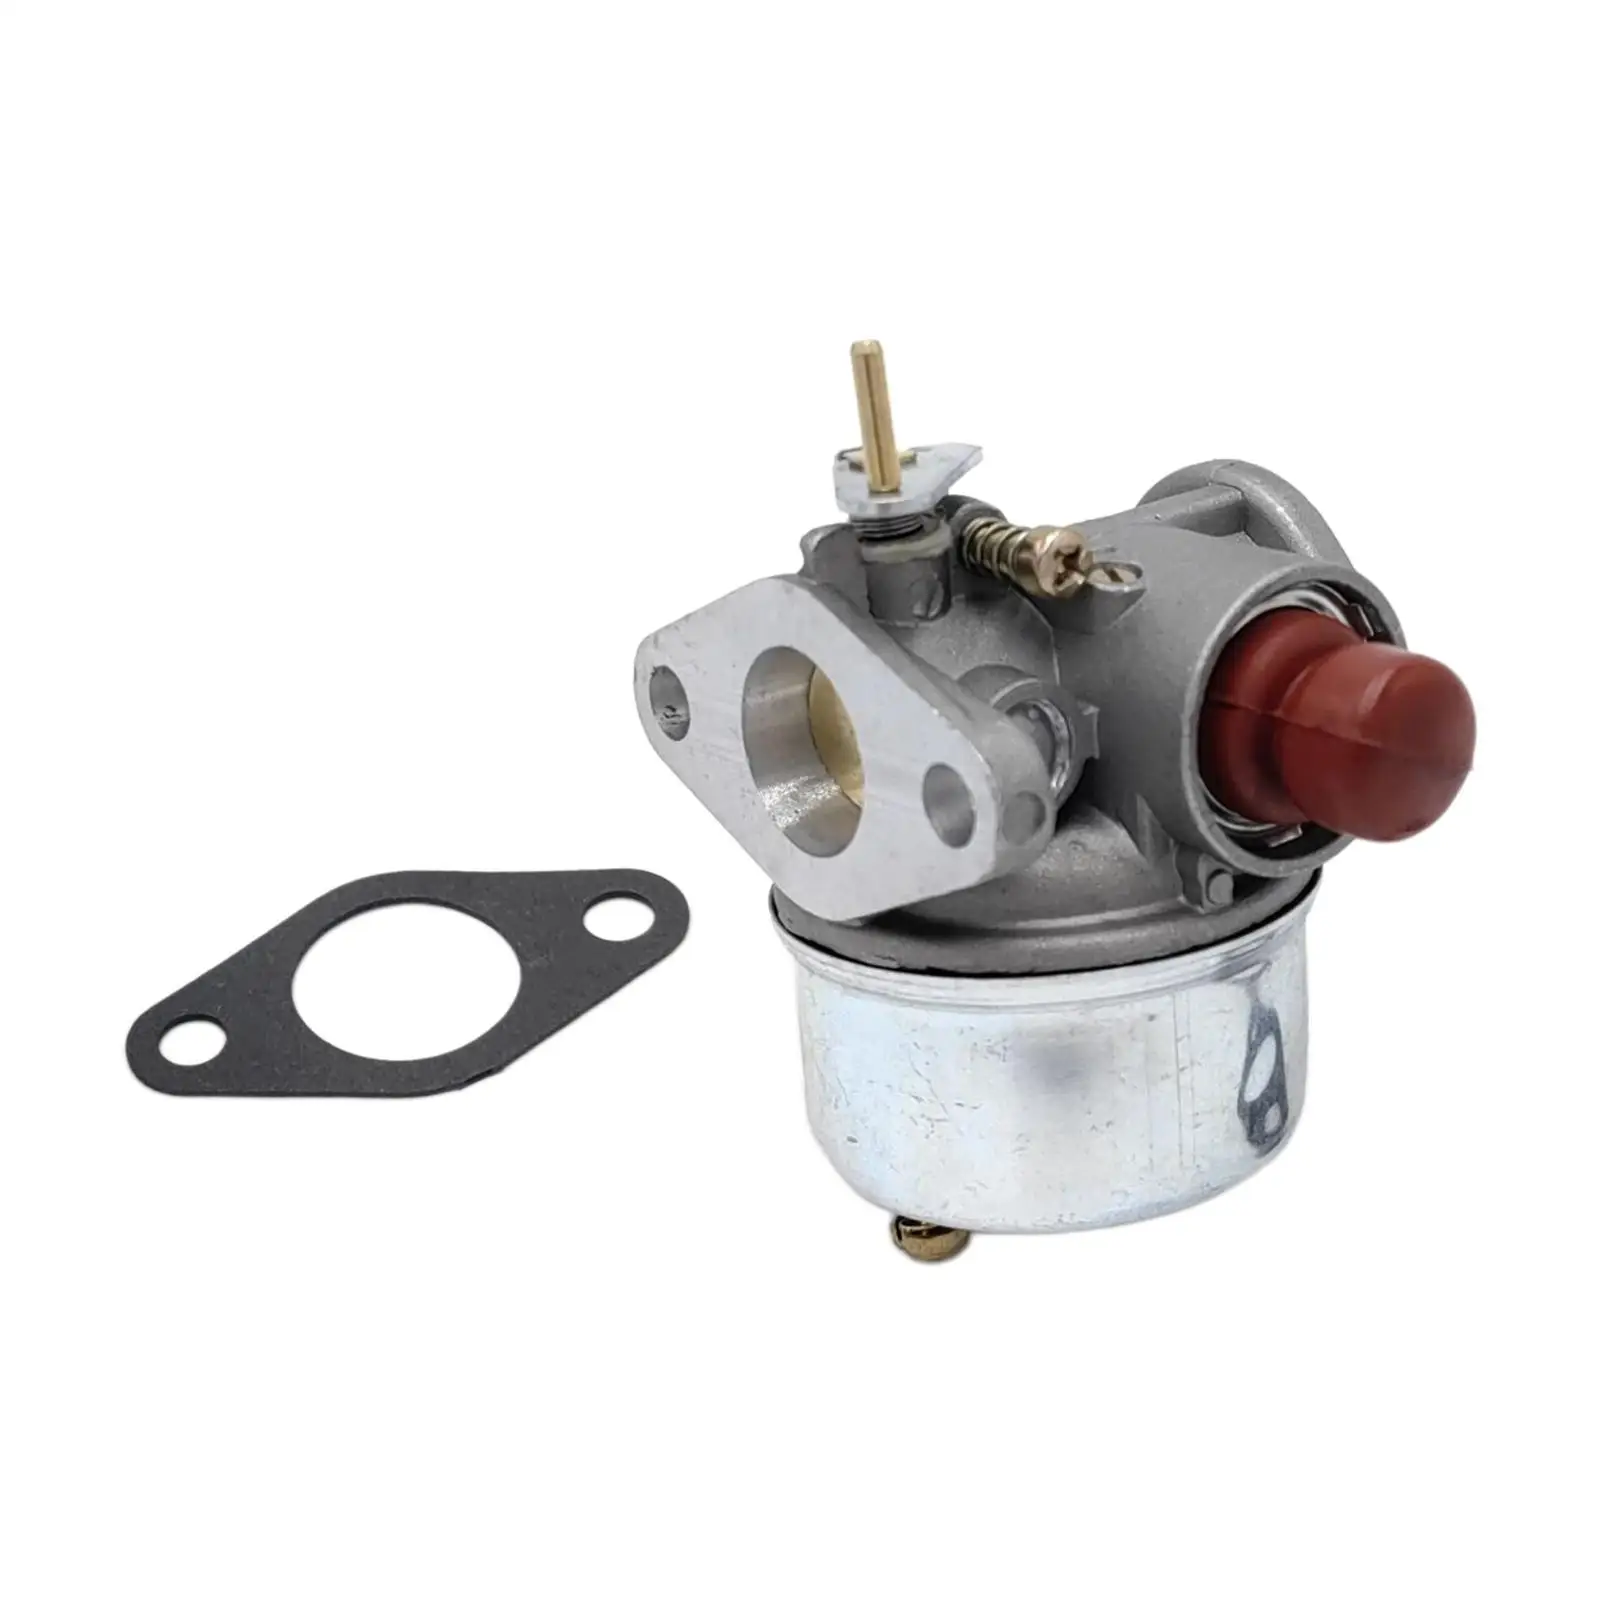 Carburetor with Gasket 2308.8010 Engine Lawn Mower Assembly Easy to Install for Horizontal Motore Tecumseh Geotec GEO35, GEO40